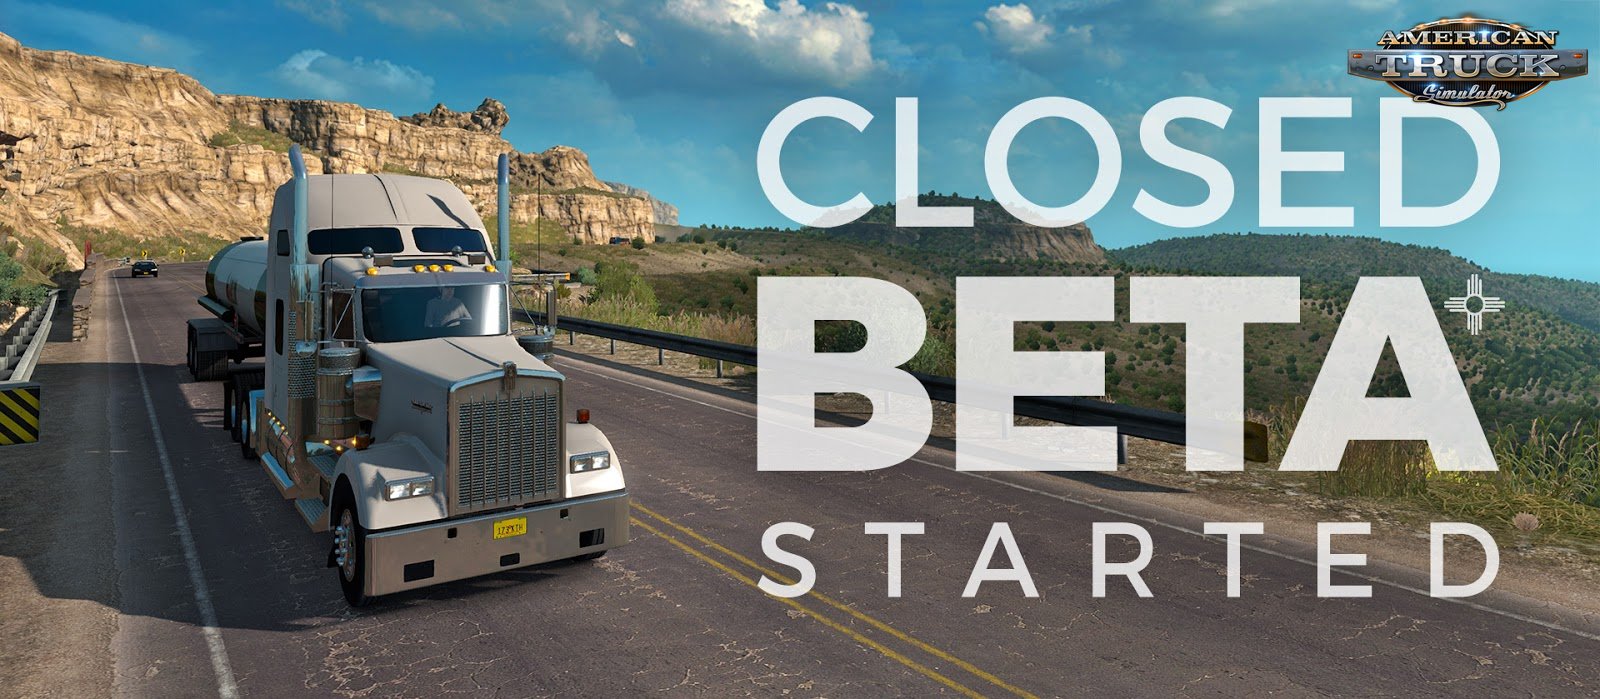 New Mexico: Landmarks and Closed Beta Announcement